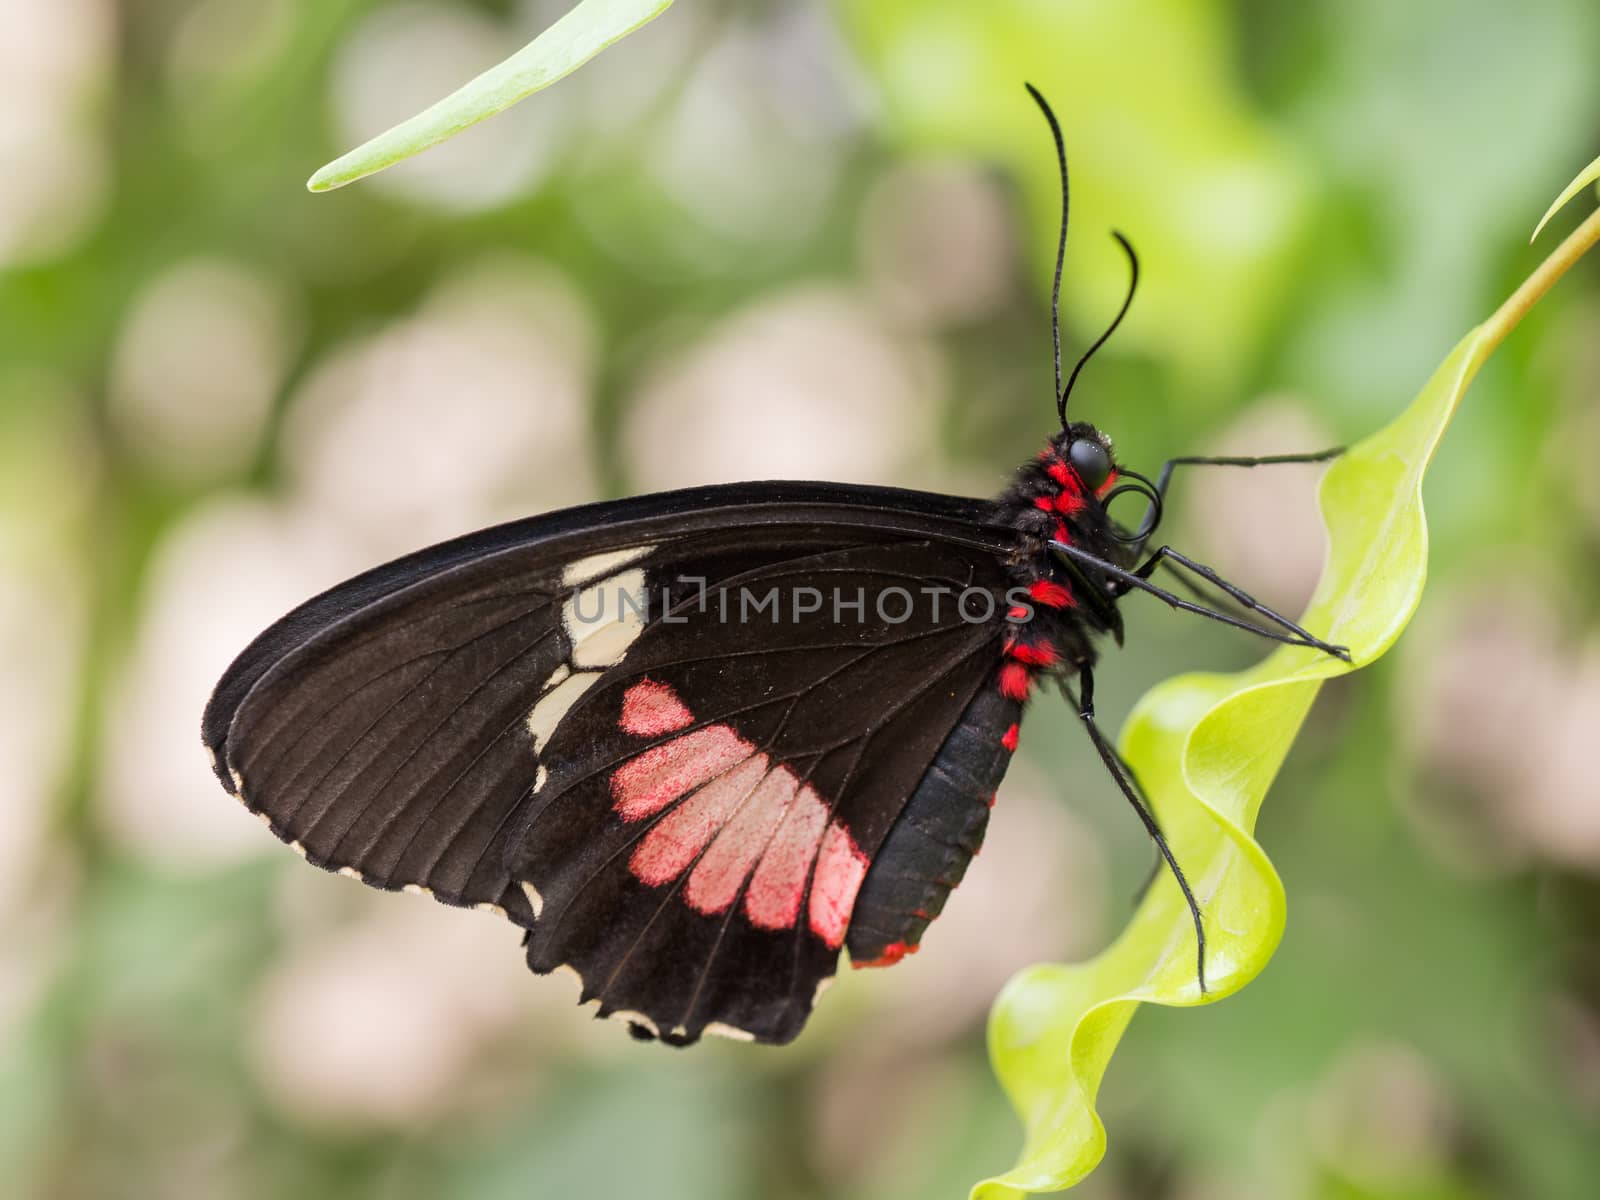 Closeup side portrait view of a black and red doris butterfly